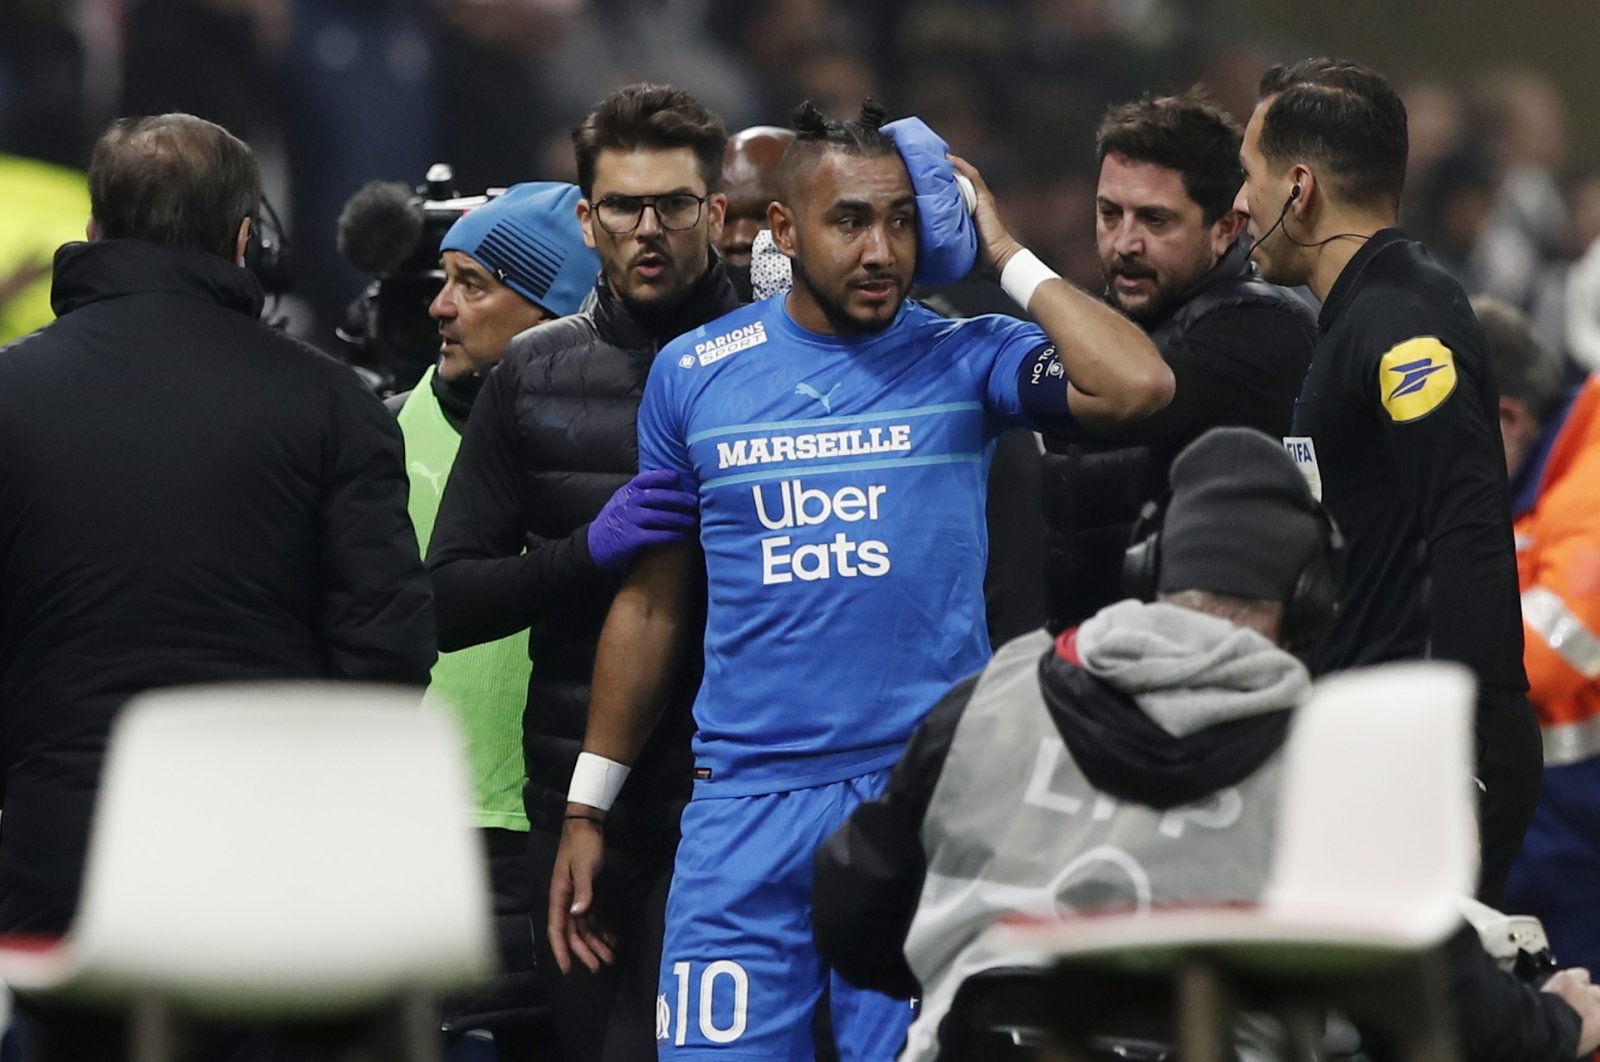 Marseille&#039;s Dimitri Payet (C) walks off the pitch injured after being hit by a water bottle thrown by a fan, Lyon, France, Nov. 21, 2021. (Reuters Photo)